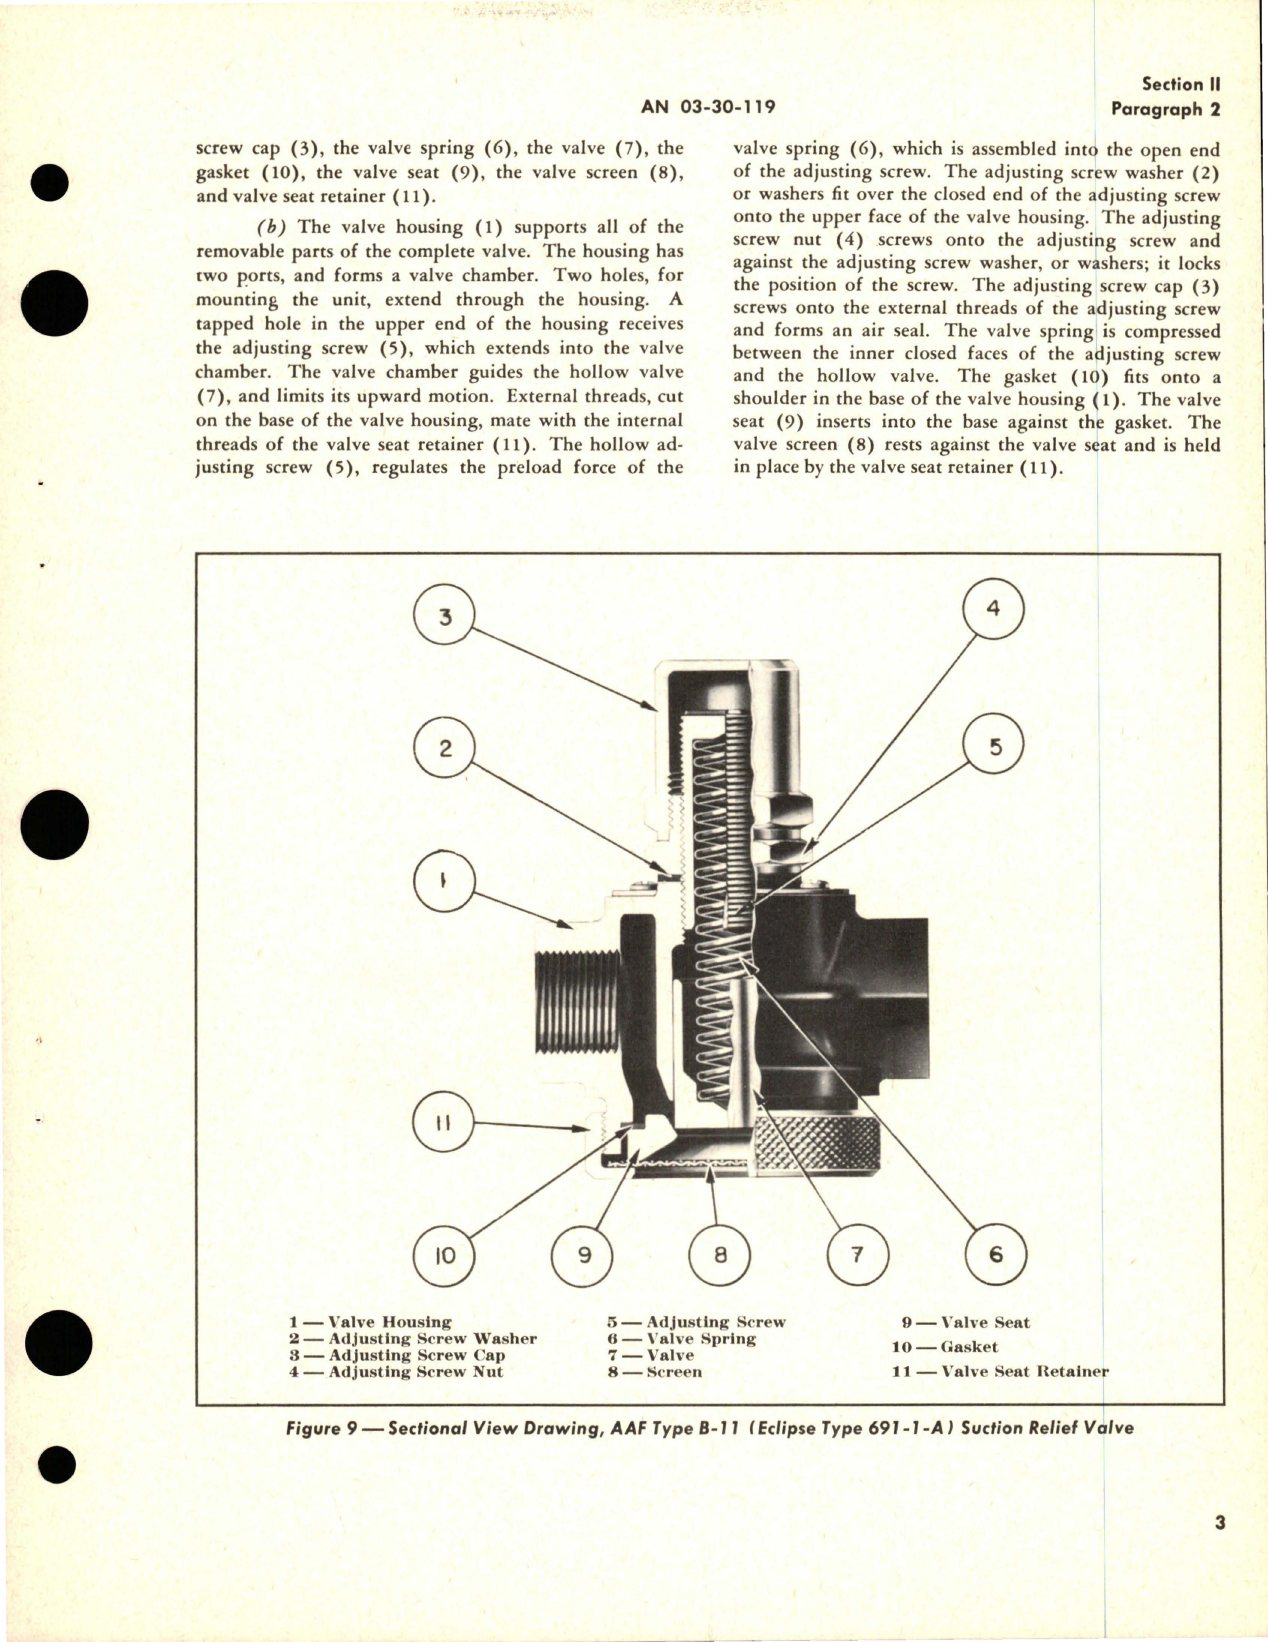 Sample page 9 from AirCorps Library document: Instructions with Parts Catalog for Pneumatic System Valves - Types B-4, B-8, B-11, and 612-7-A